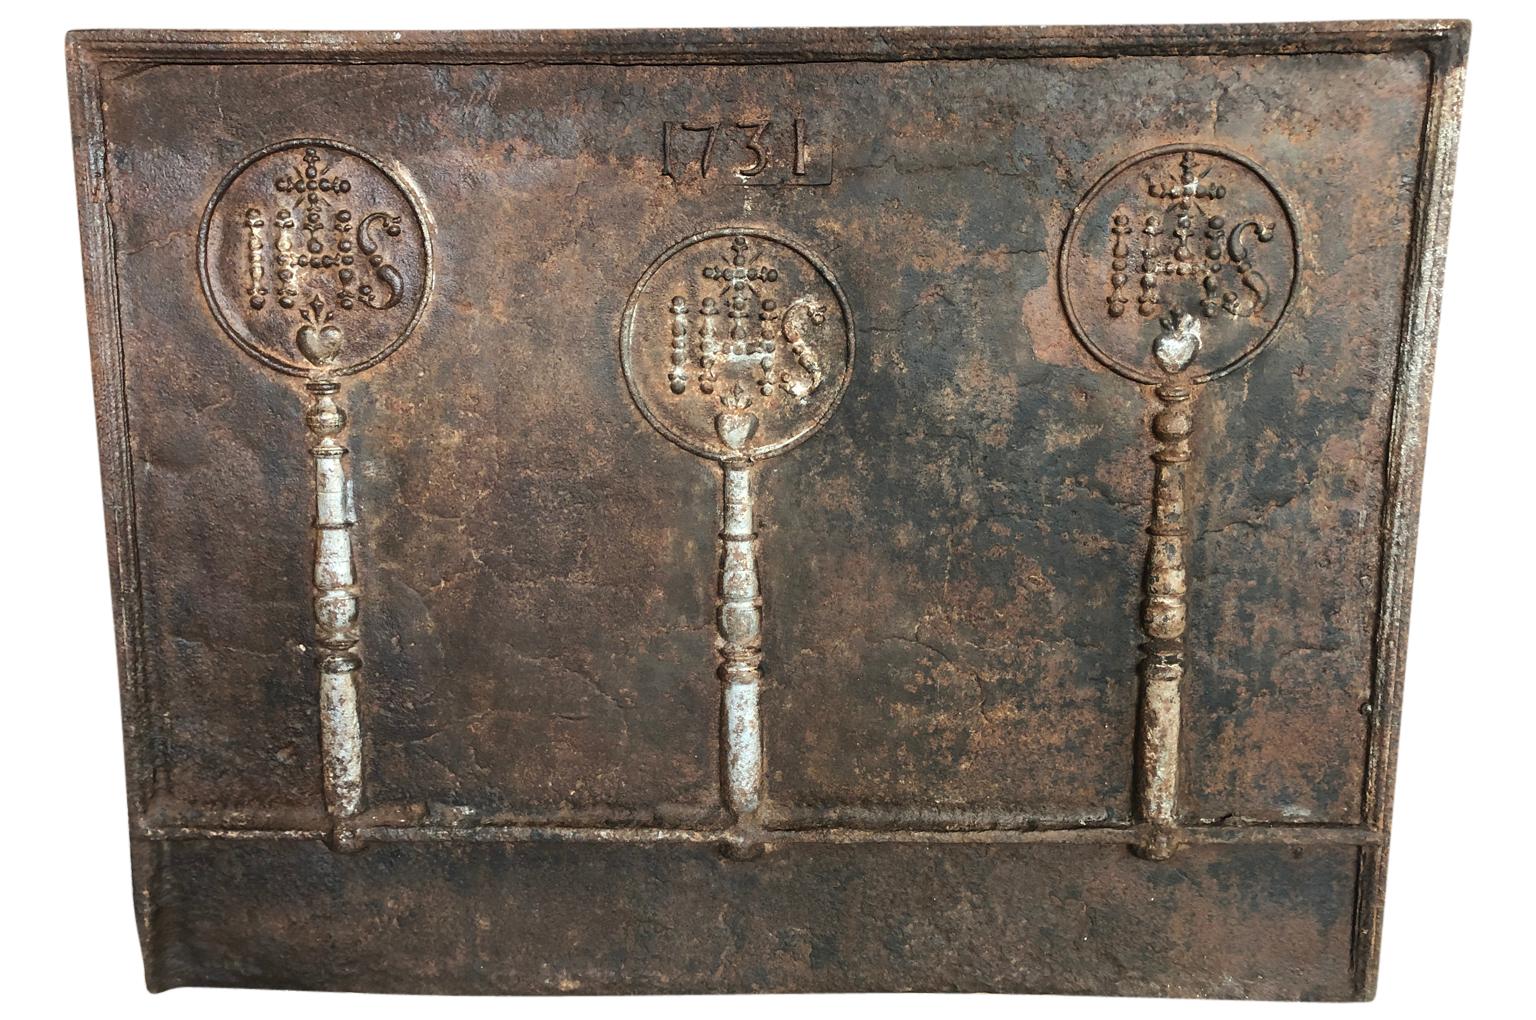 A wonderful early 18th century fireback from the South of France. A luxury item that served not only to adorn the fireplace, but to protect the backwall of the fireplace and to radiate heat outwards. Beautifully cast in iron and decorated with